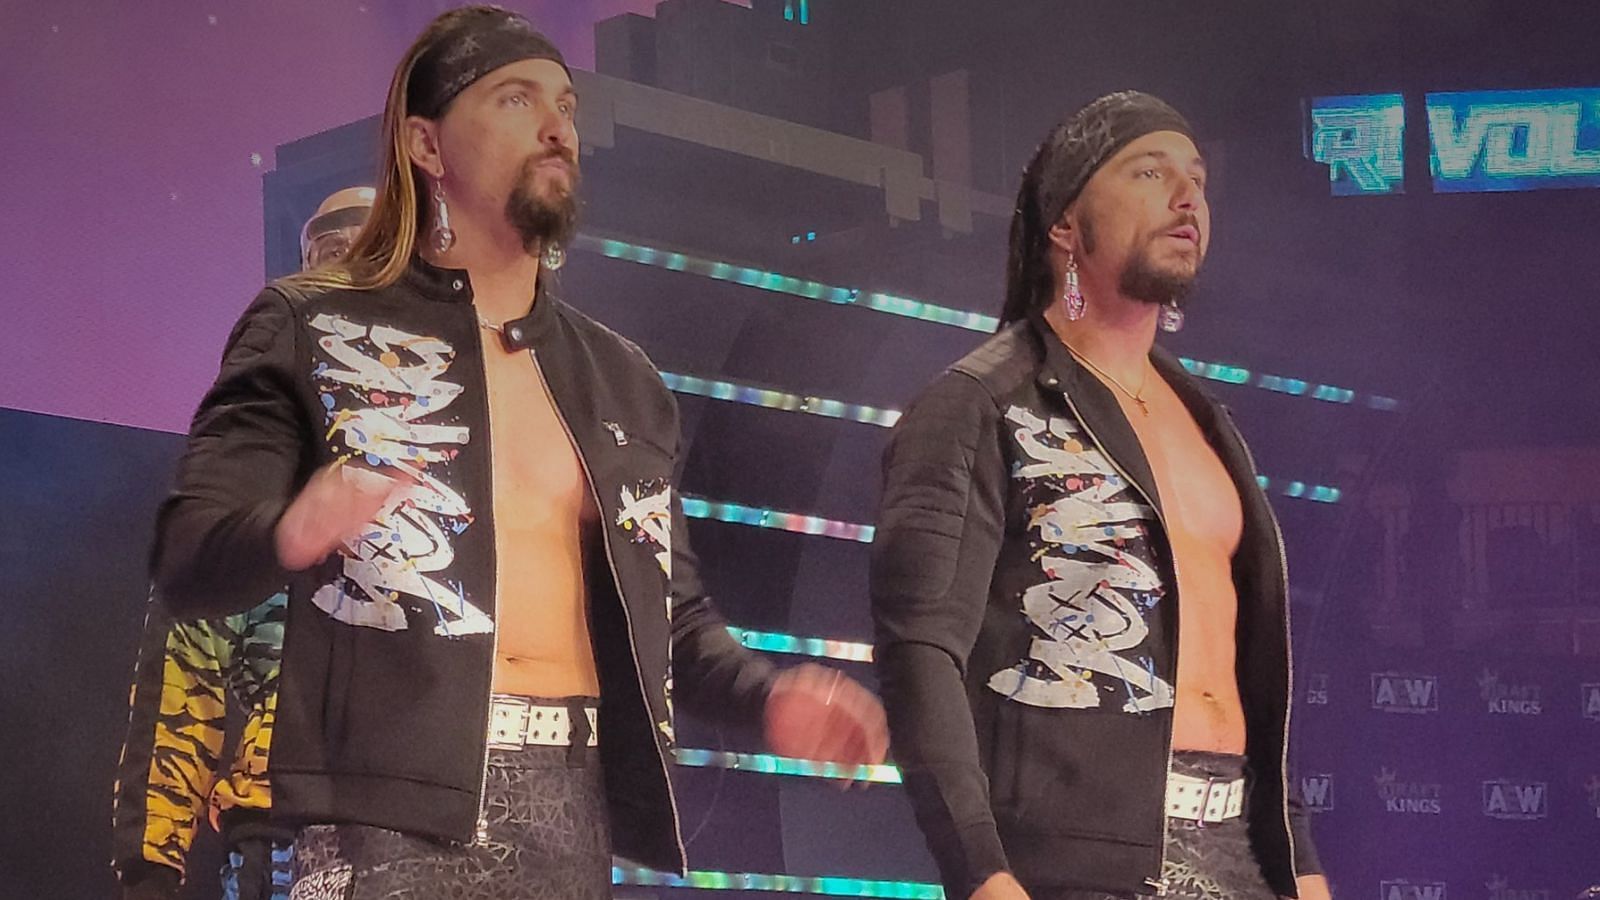 The Bucks during their entrance at AEW Revolution.